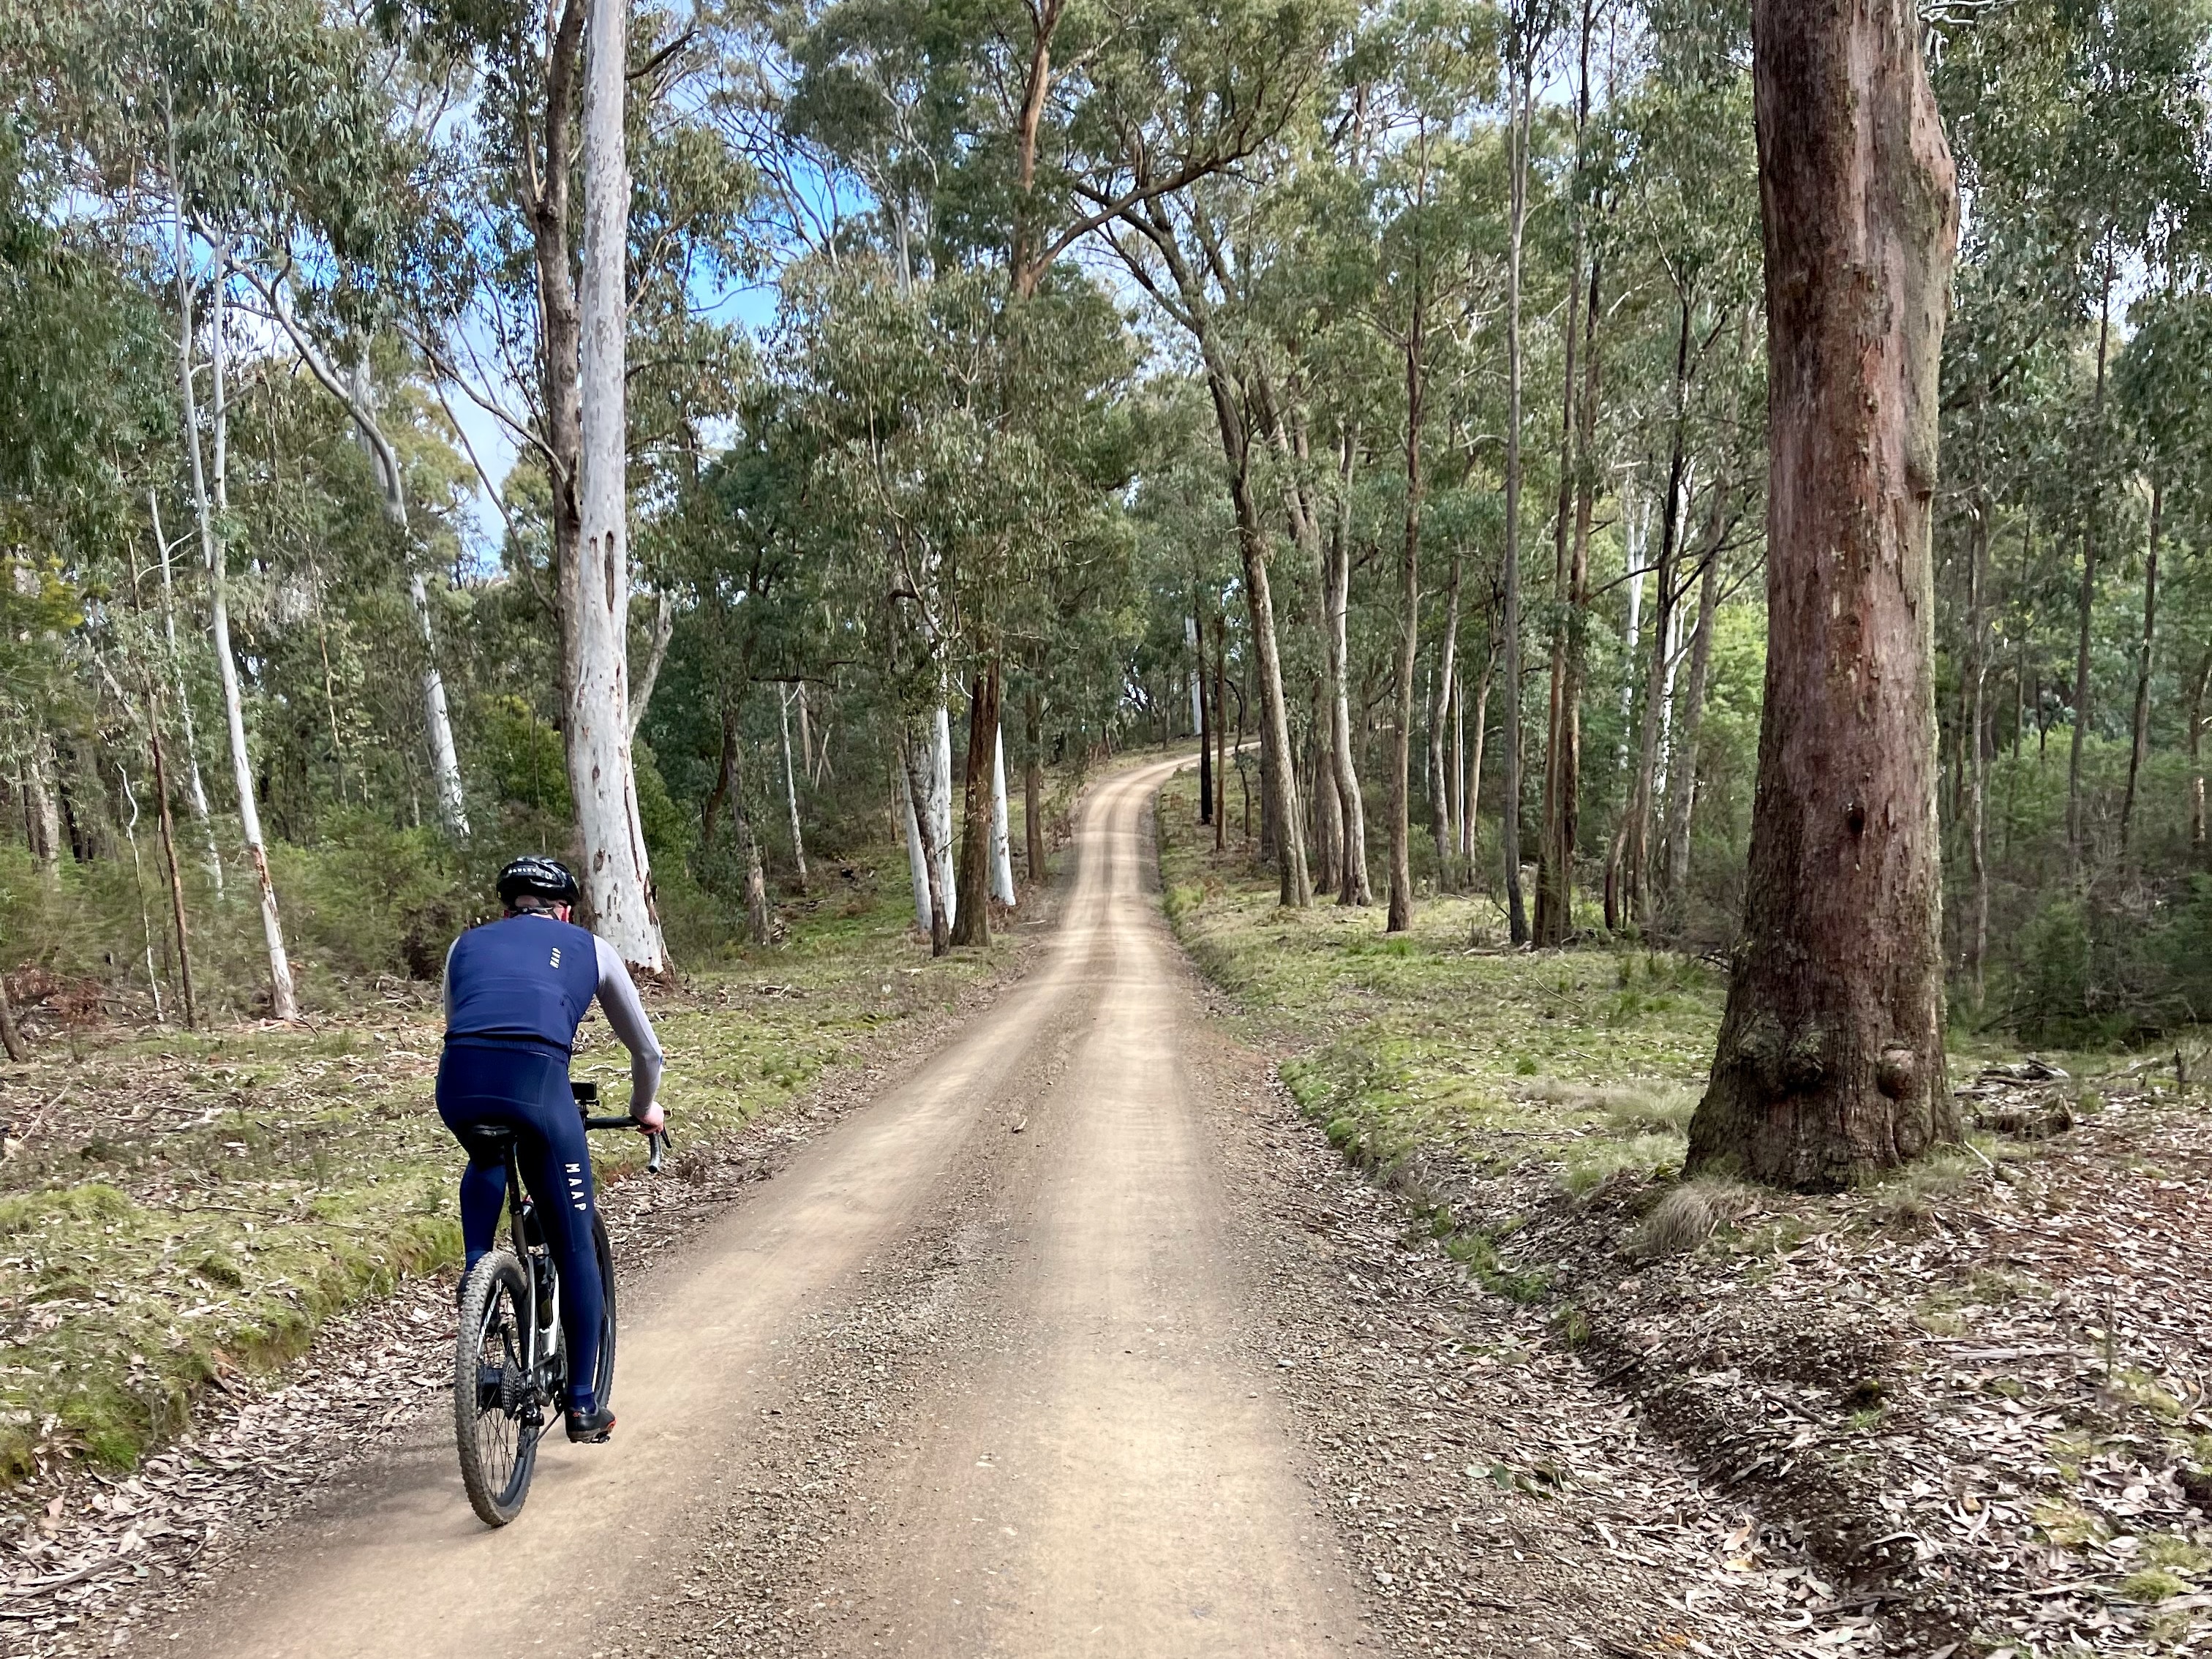 A cyclist riding on a smooth gravel road lined with tall native trees and surrounded by native bushland